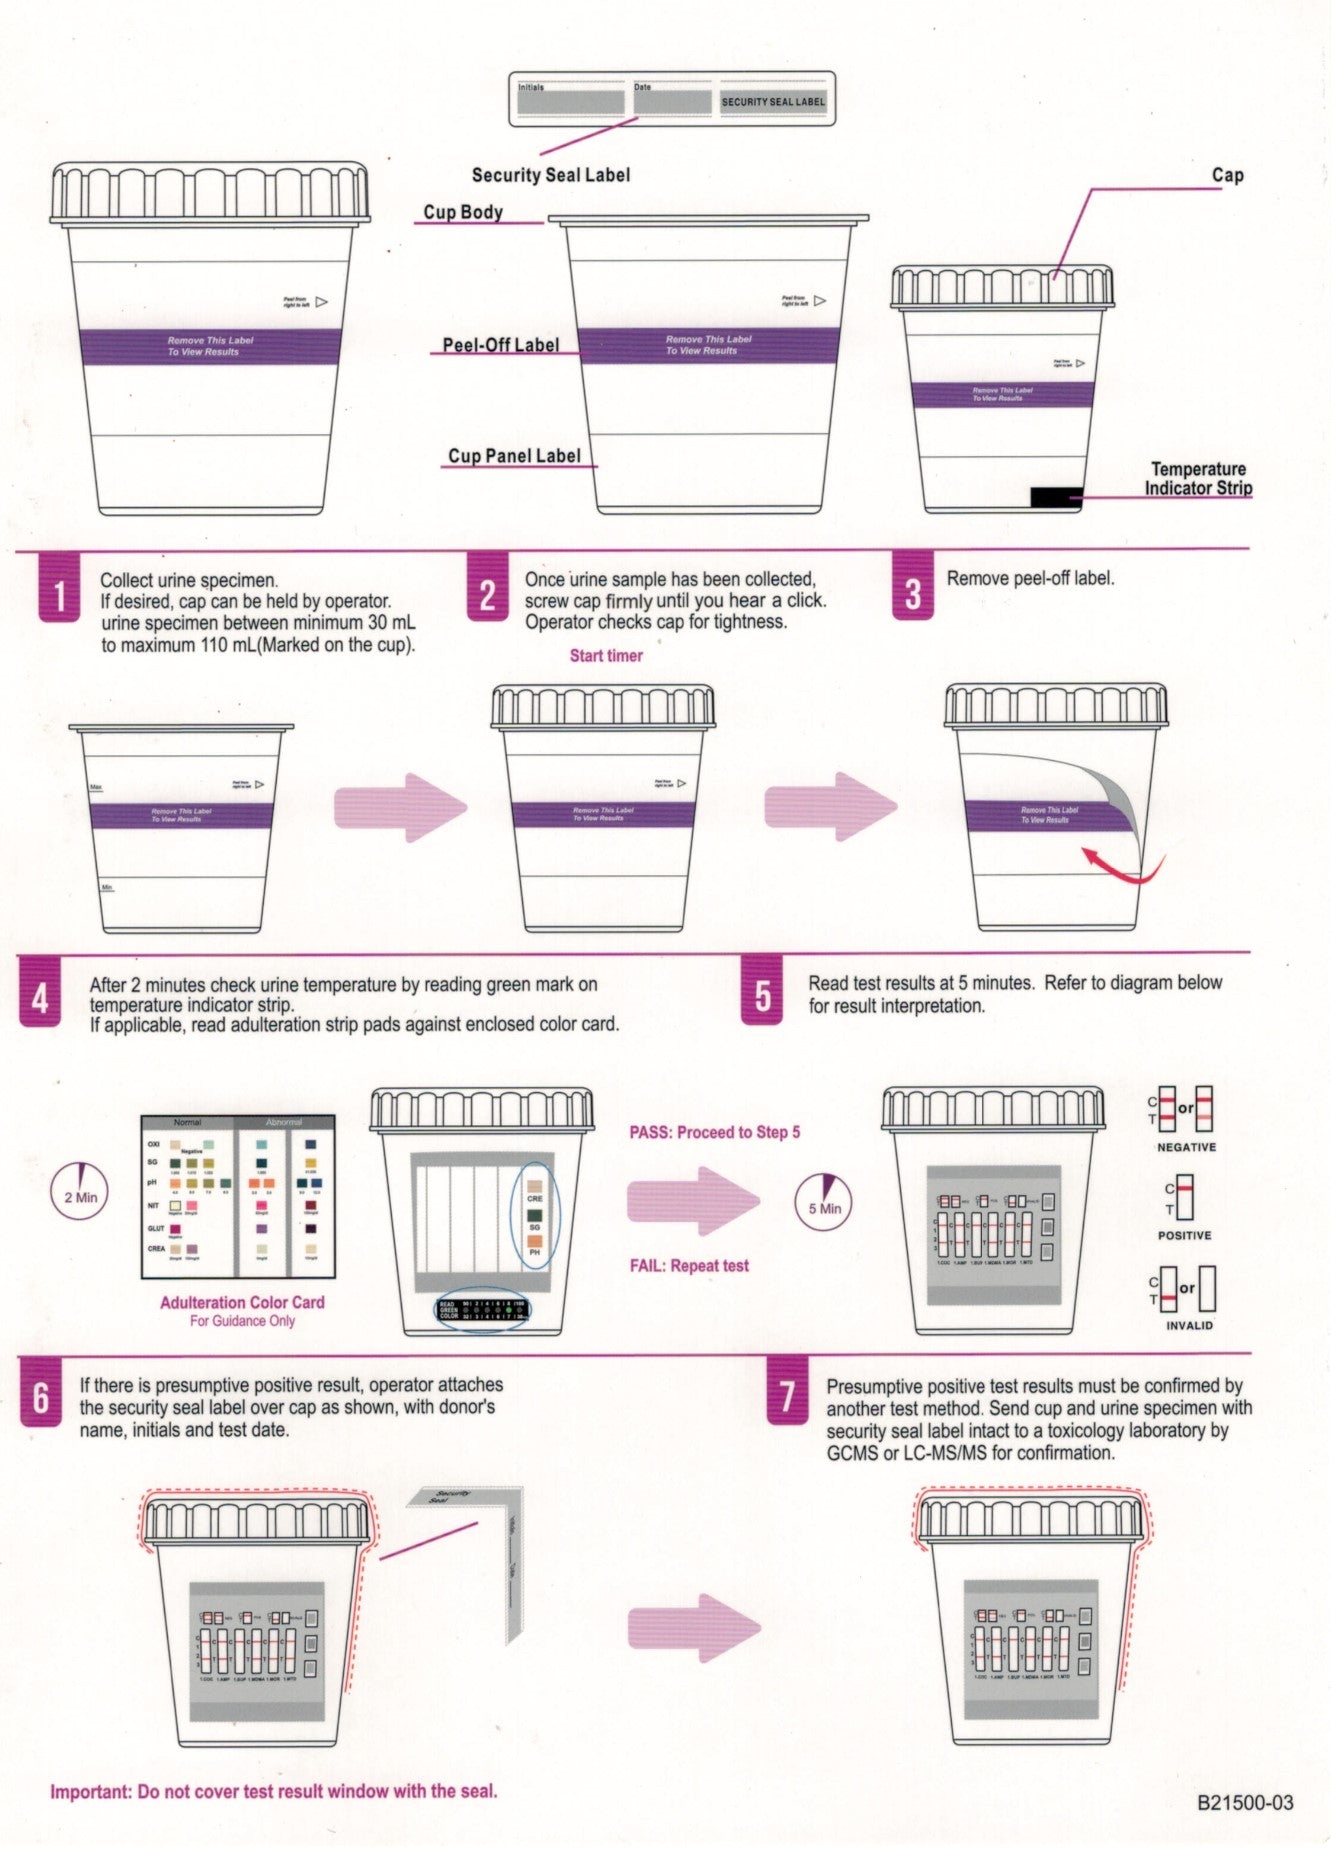 14 Panel Drug Test Cup with Instructions